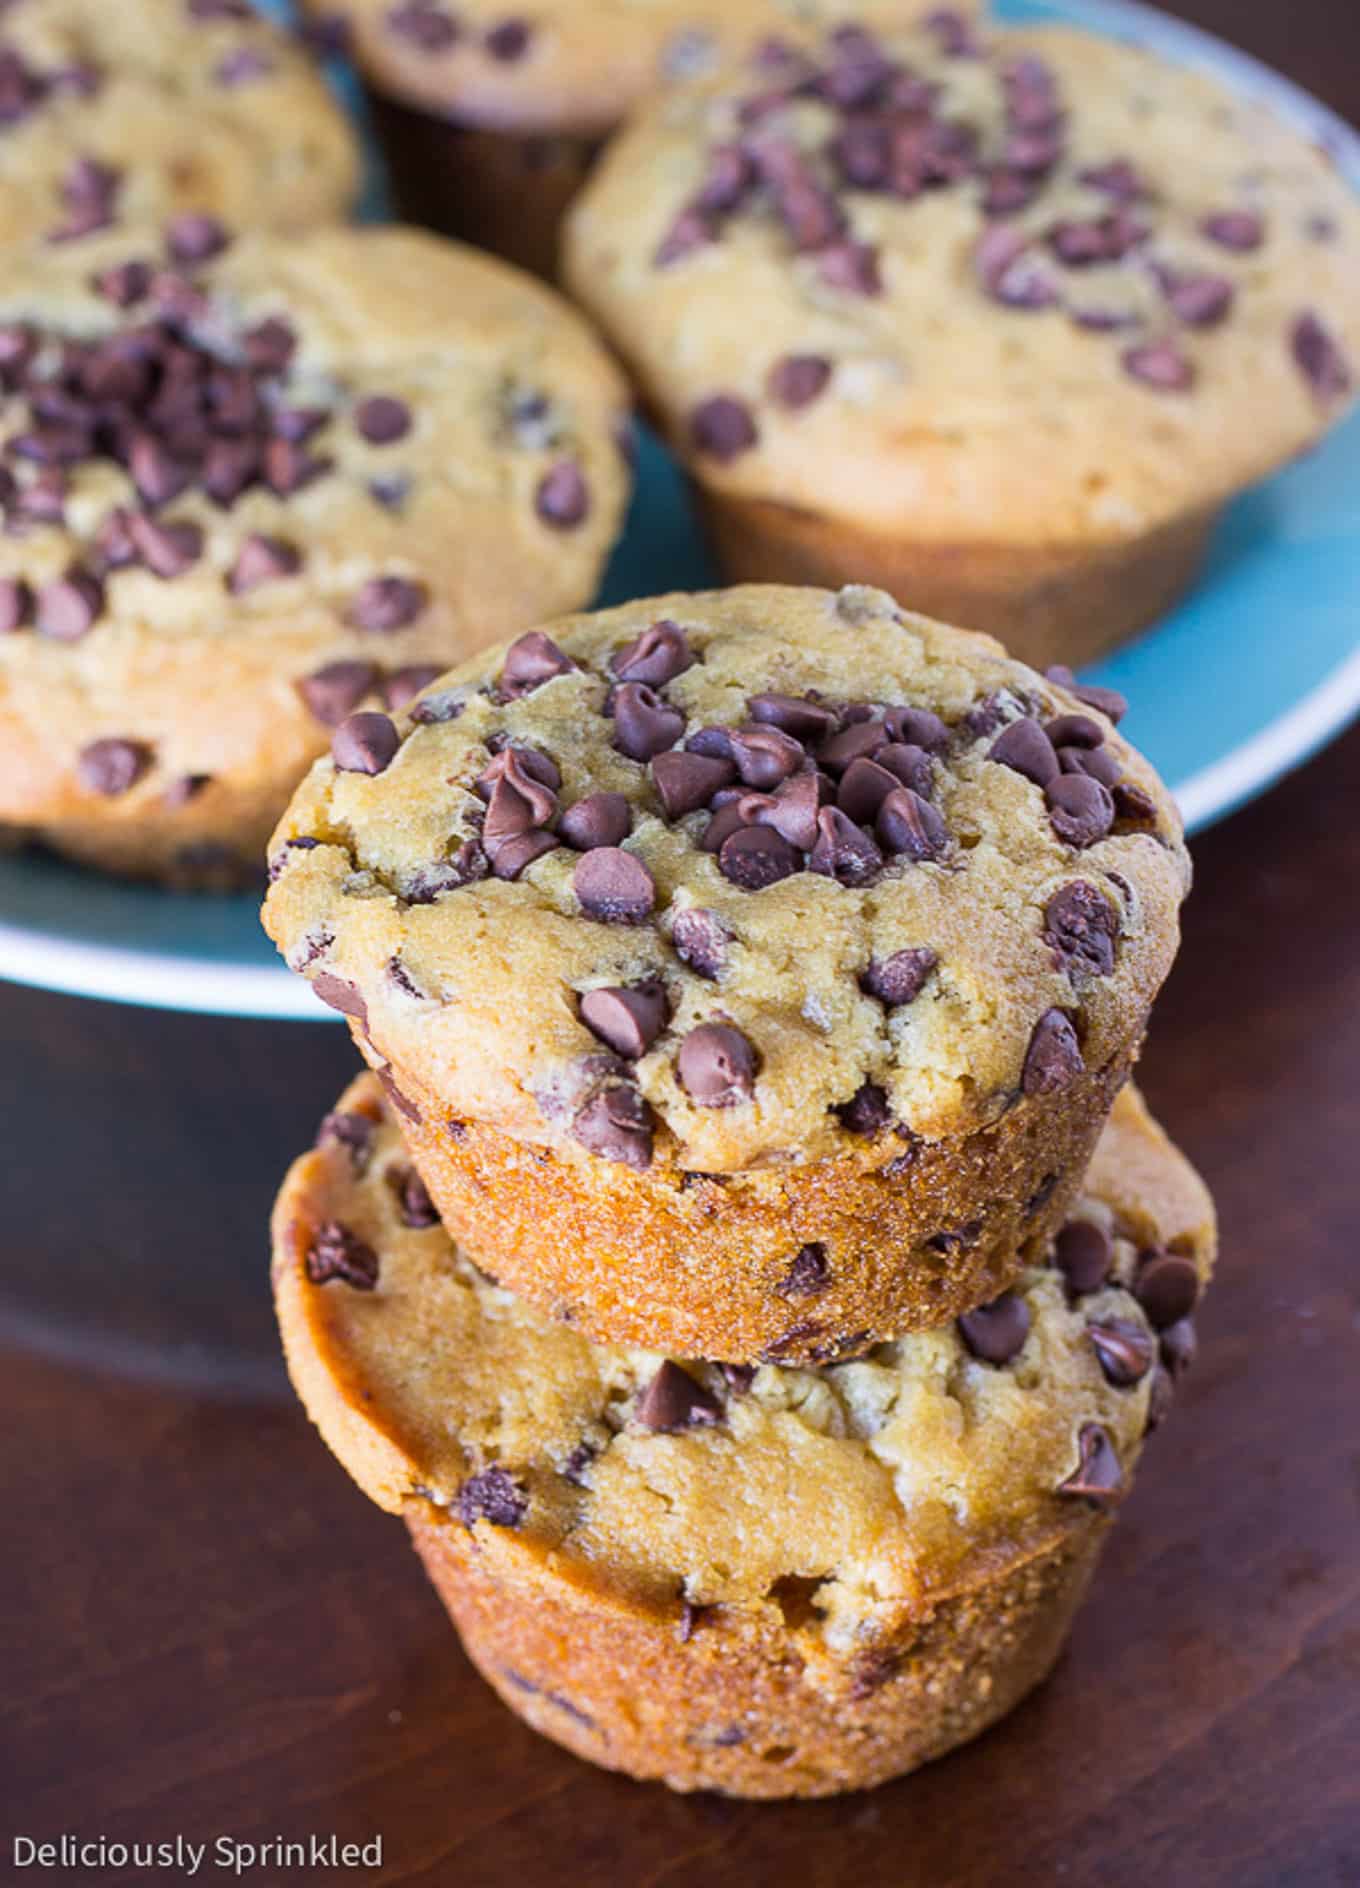 Two chocolate chip muffins stacked on the table with a plate of muffins in the background.